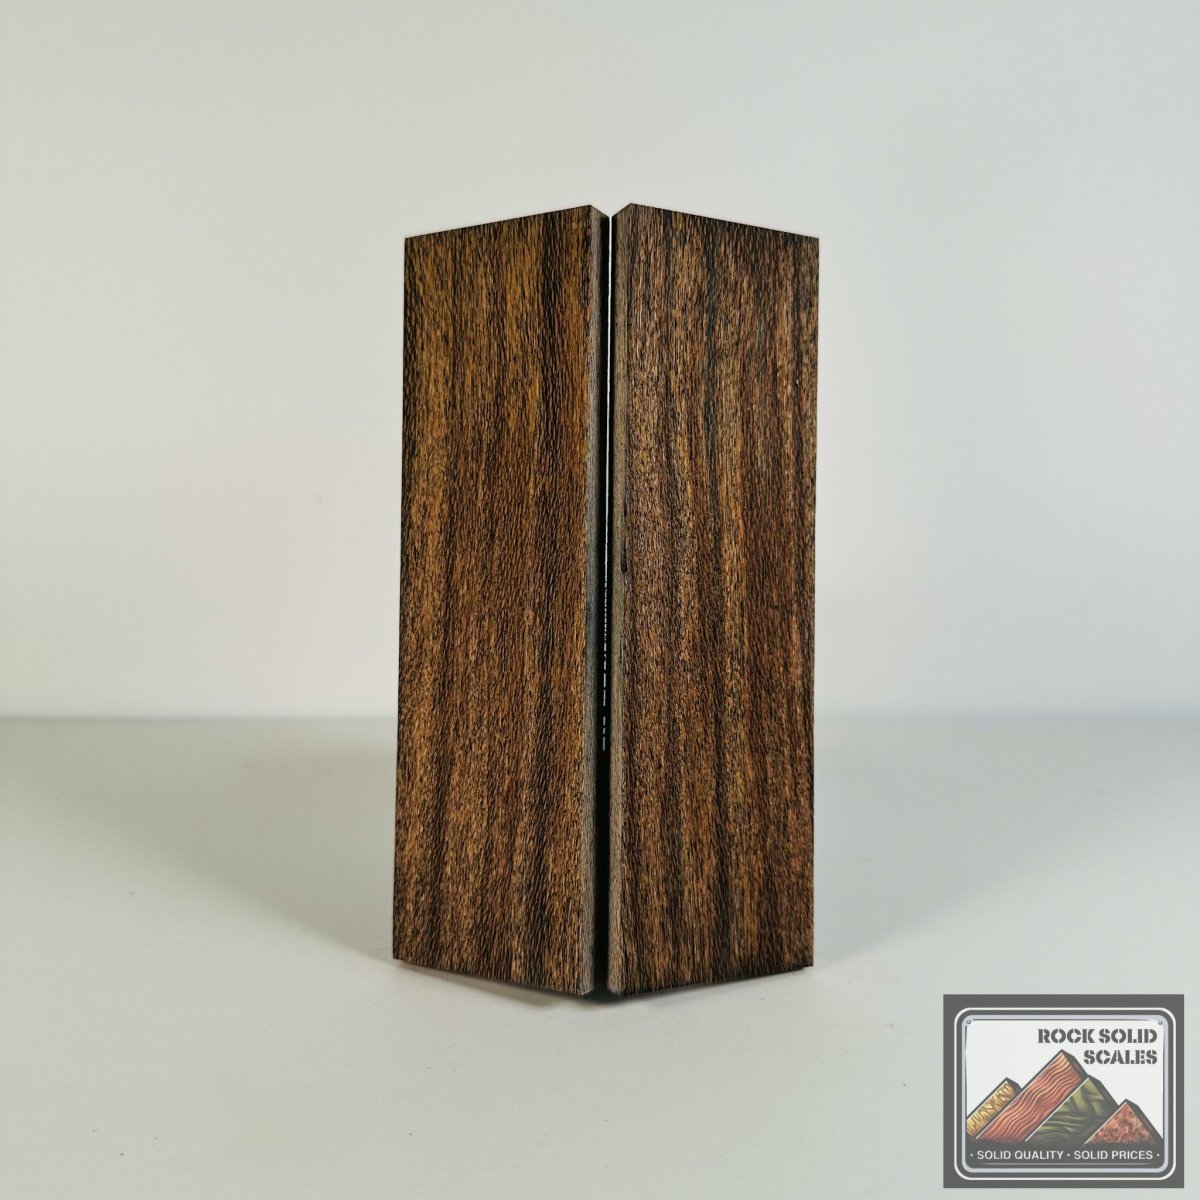 #2669 - Black and Blue Quartersawn Sycamore - RockSolid Scales -